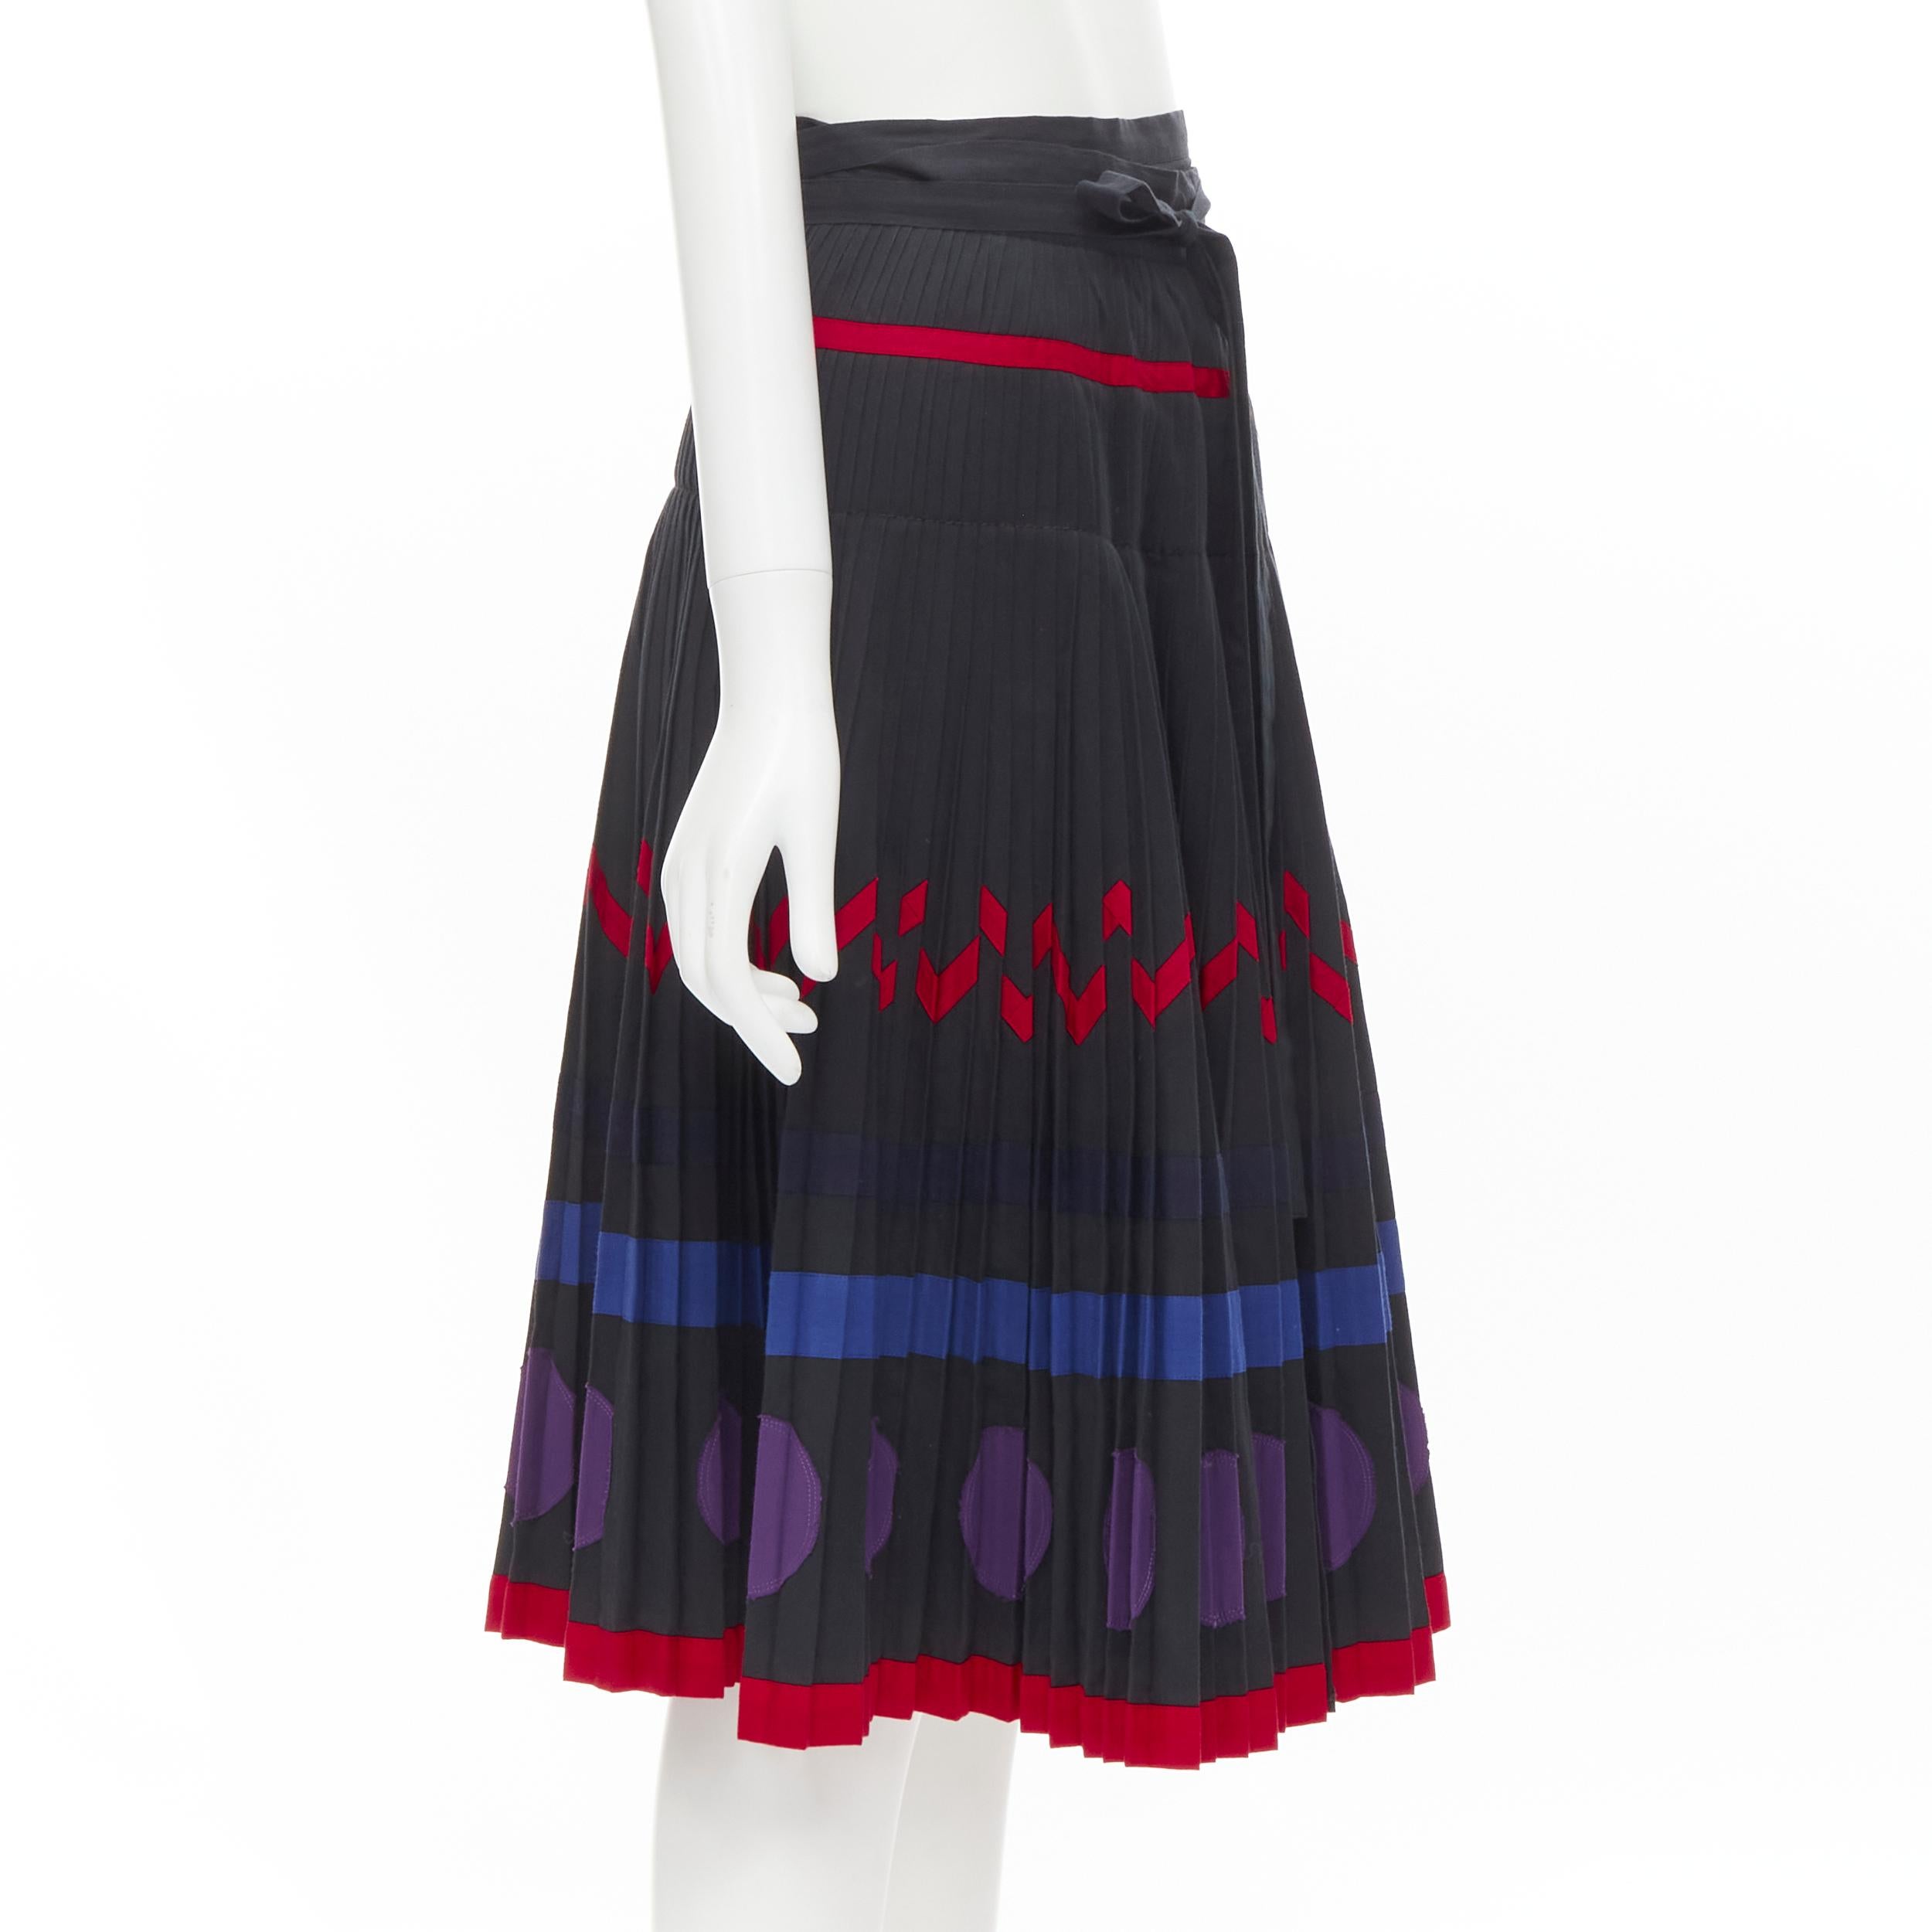 COMME DES GARCONS 1980s black geometric pattern pleated wrapped flared skirt S 
Reference: CRTI/A00510 
Brand: Comme Des Garcons 
Designer: Rei Kawakubo 
Material: Cotton 
Color: Black 
Pattern: Solid 
Extra Detail: Wrap skirt with self tie belt.